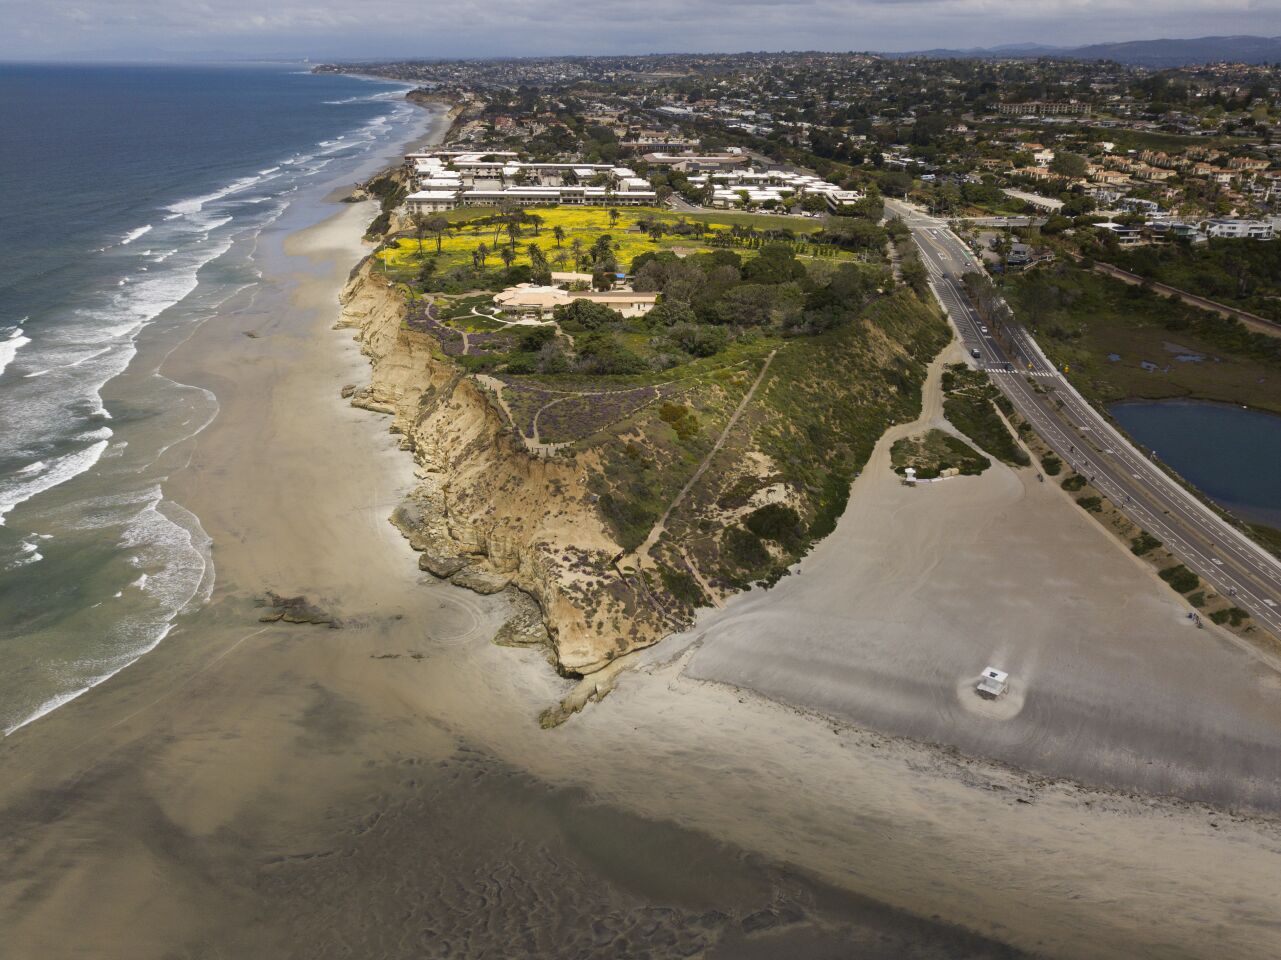 Dog Beach in north Del Mar is empty on a normally busy Sunday afternoon on April 5, 2020. All beaches in San Diego County have been closed due to COVID-19.